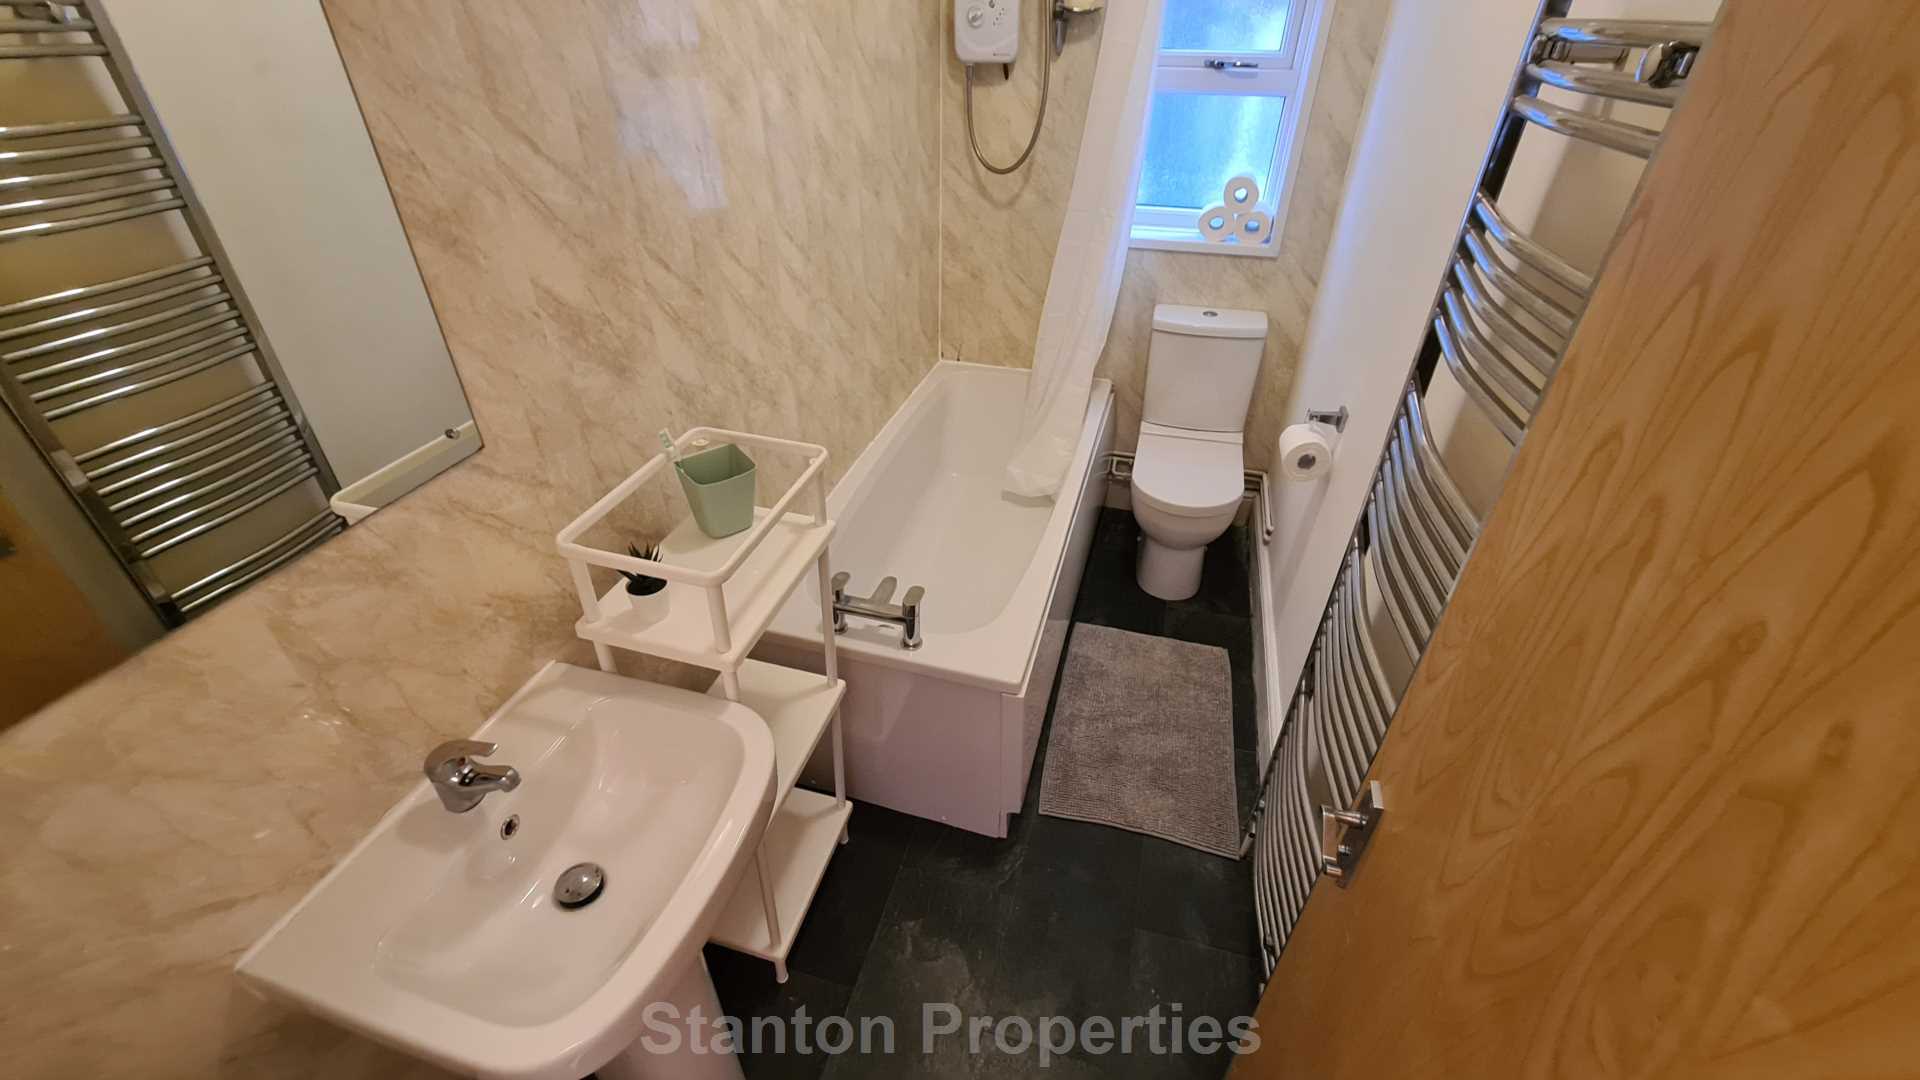 See Video Tour, £130 pppw, Albion Road, Manchester, Image 15